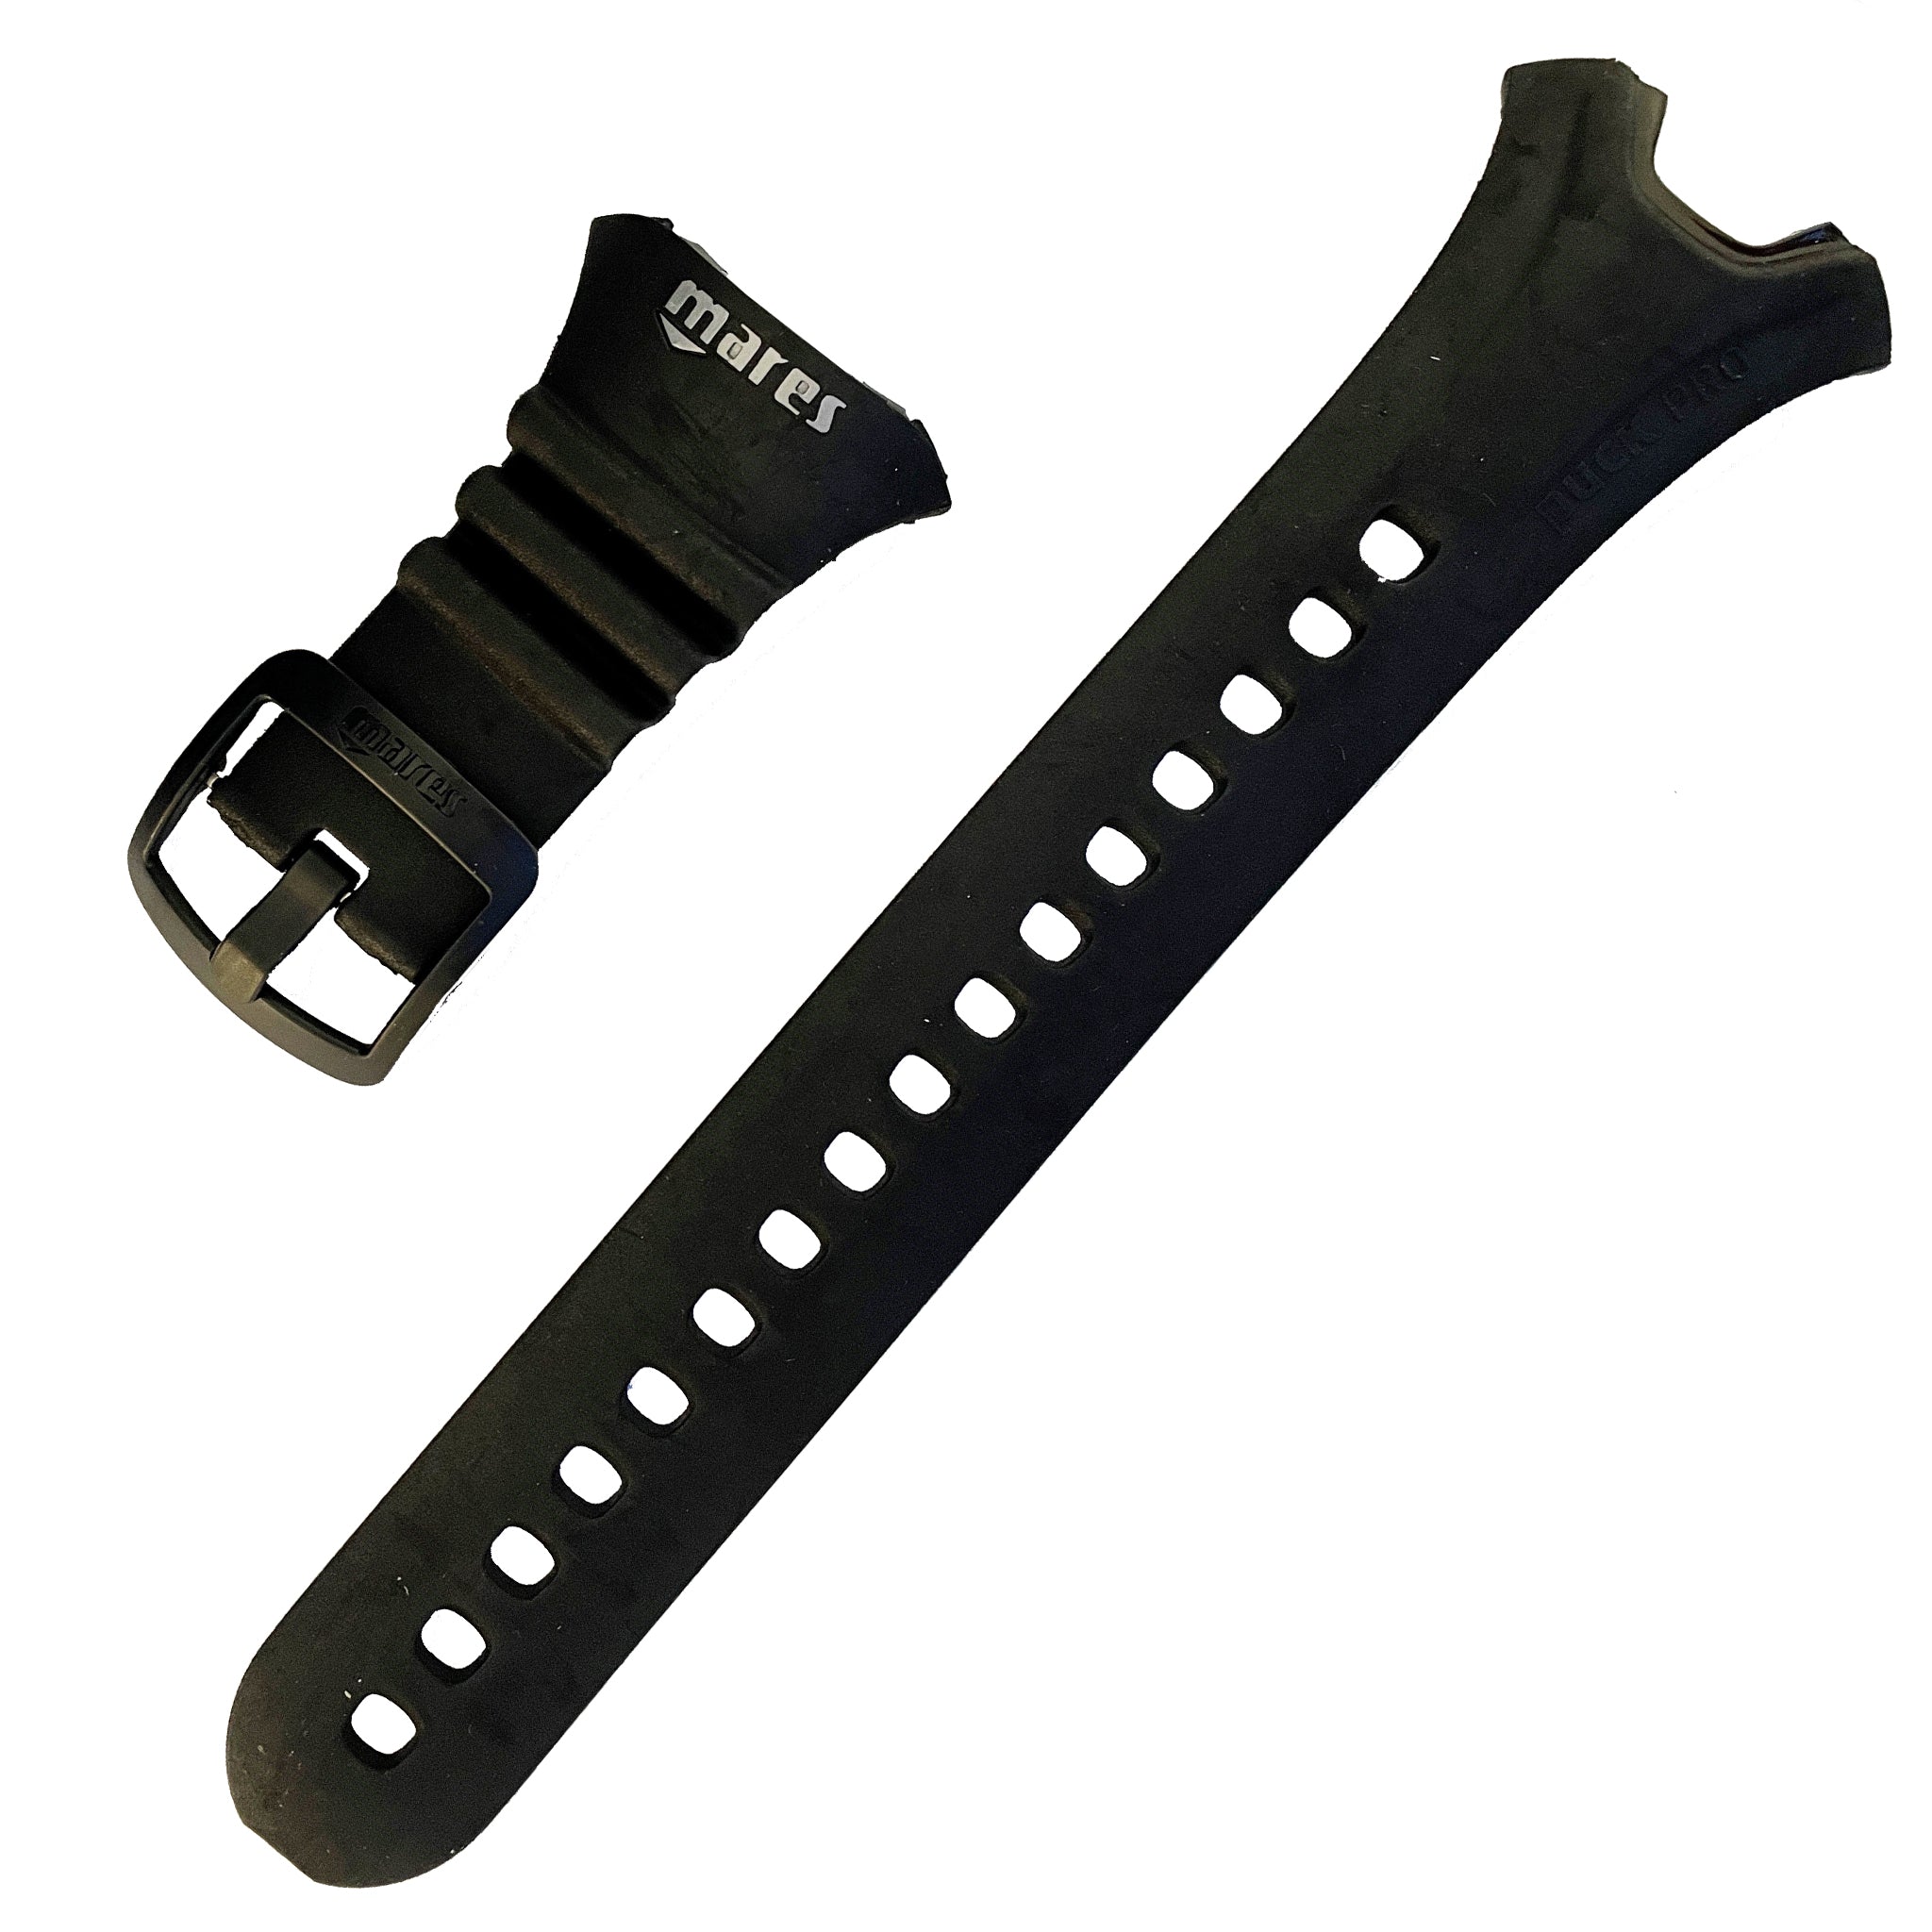 Mares Replacement Wrist Strap for Mares Puck Pro+ Dive Computer